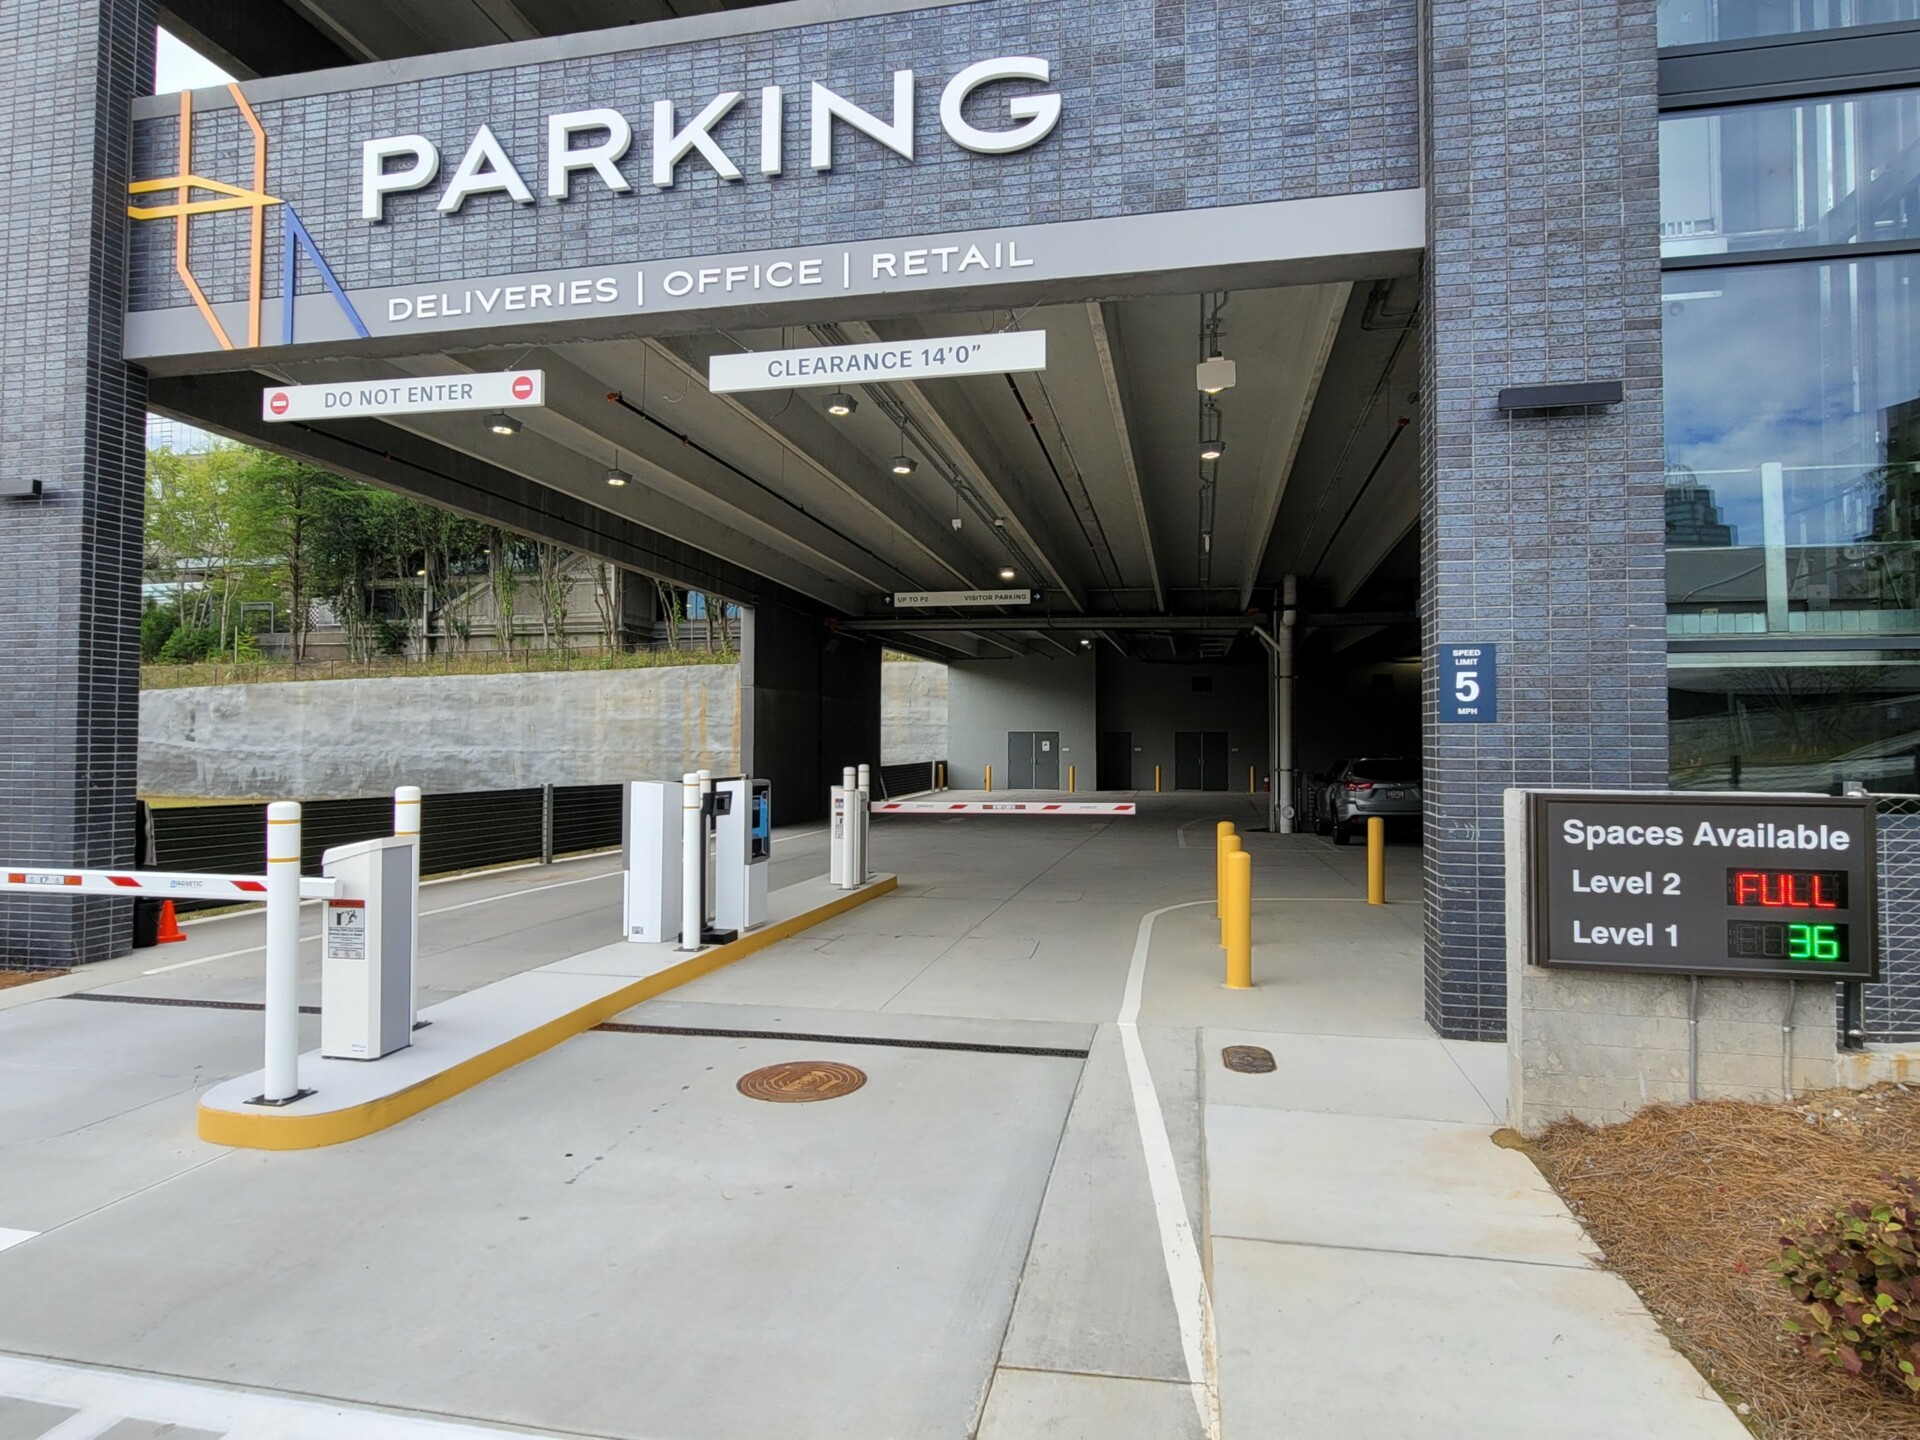 Parking access controlled with gate entry and with a sign sharing levels and parking spaces open.